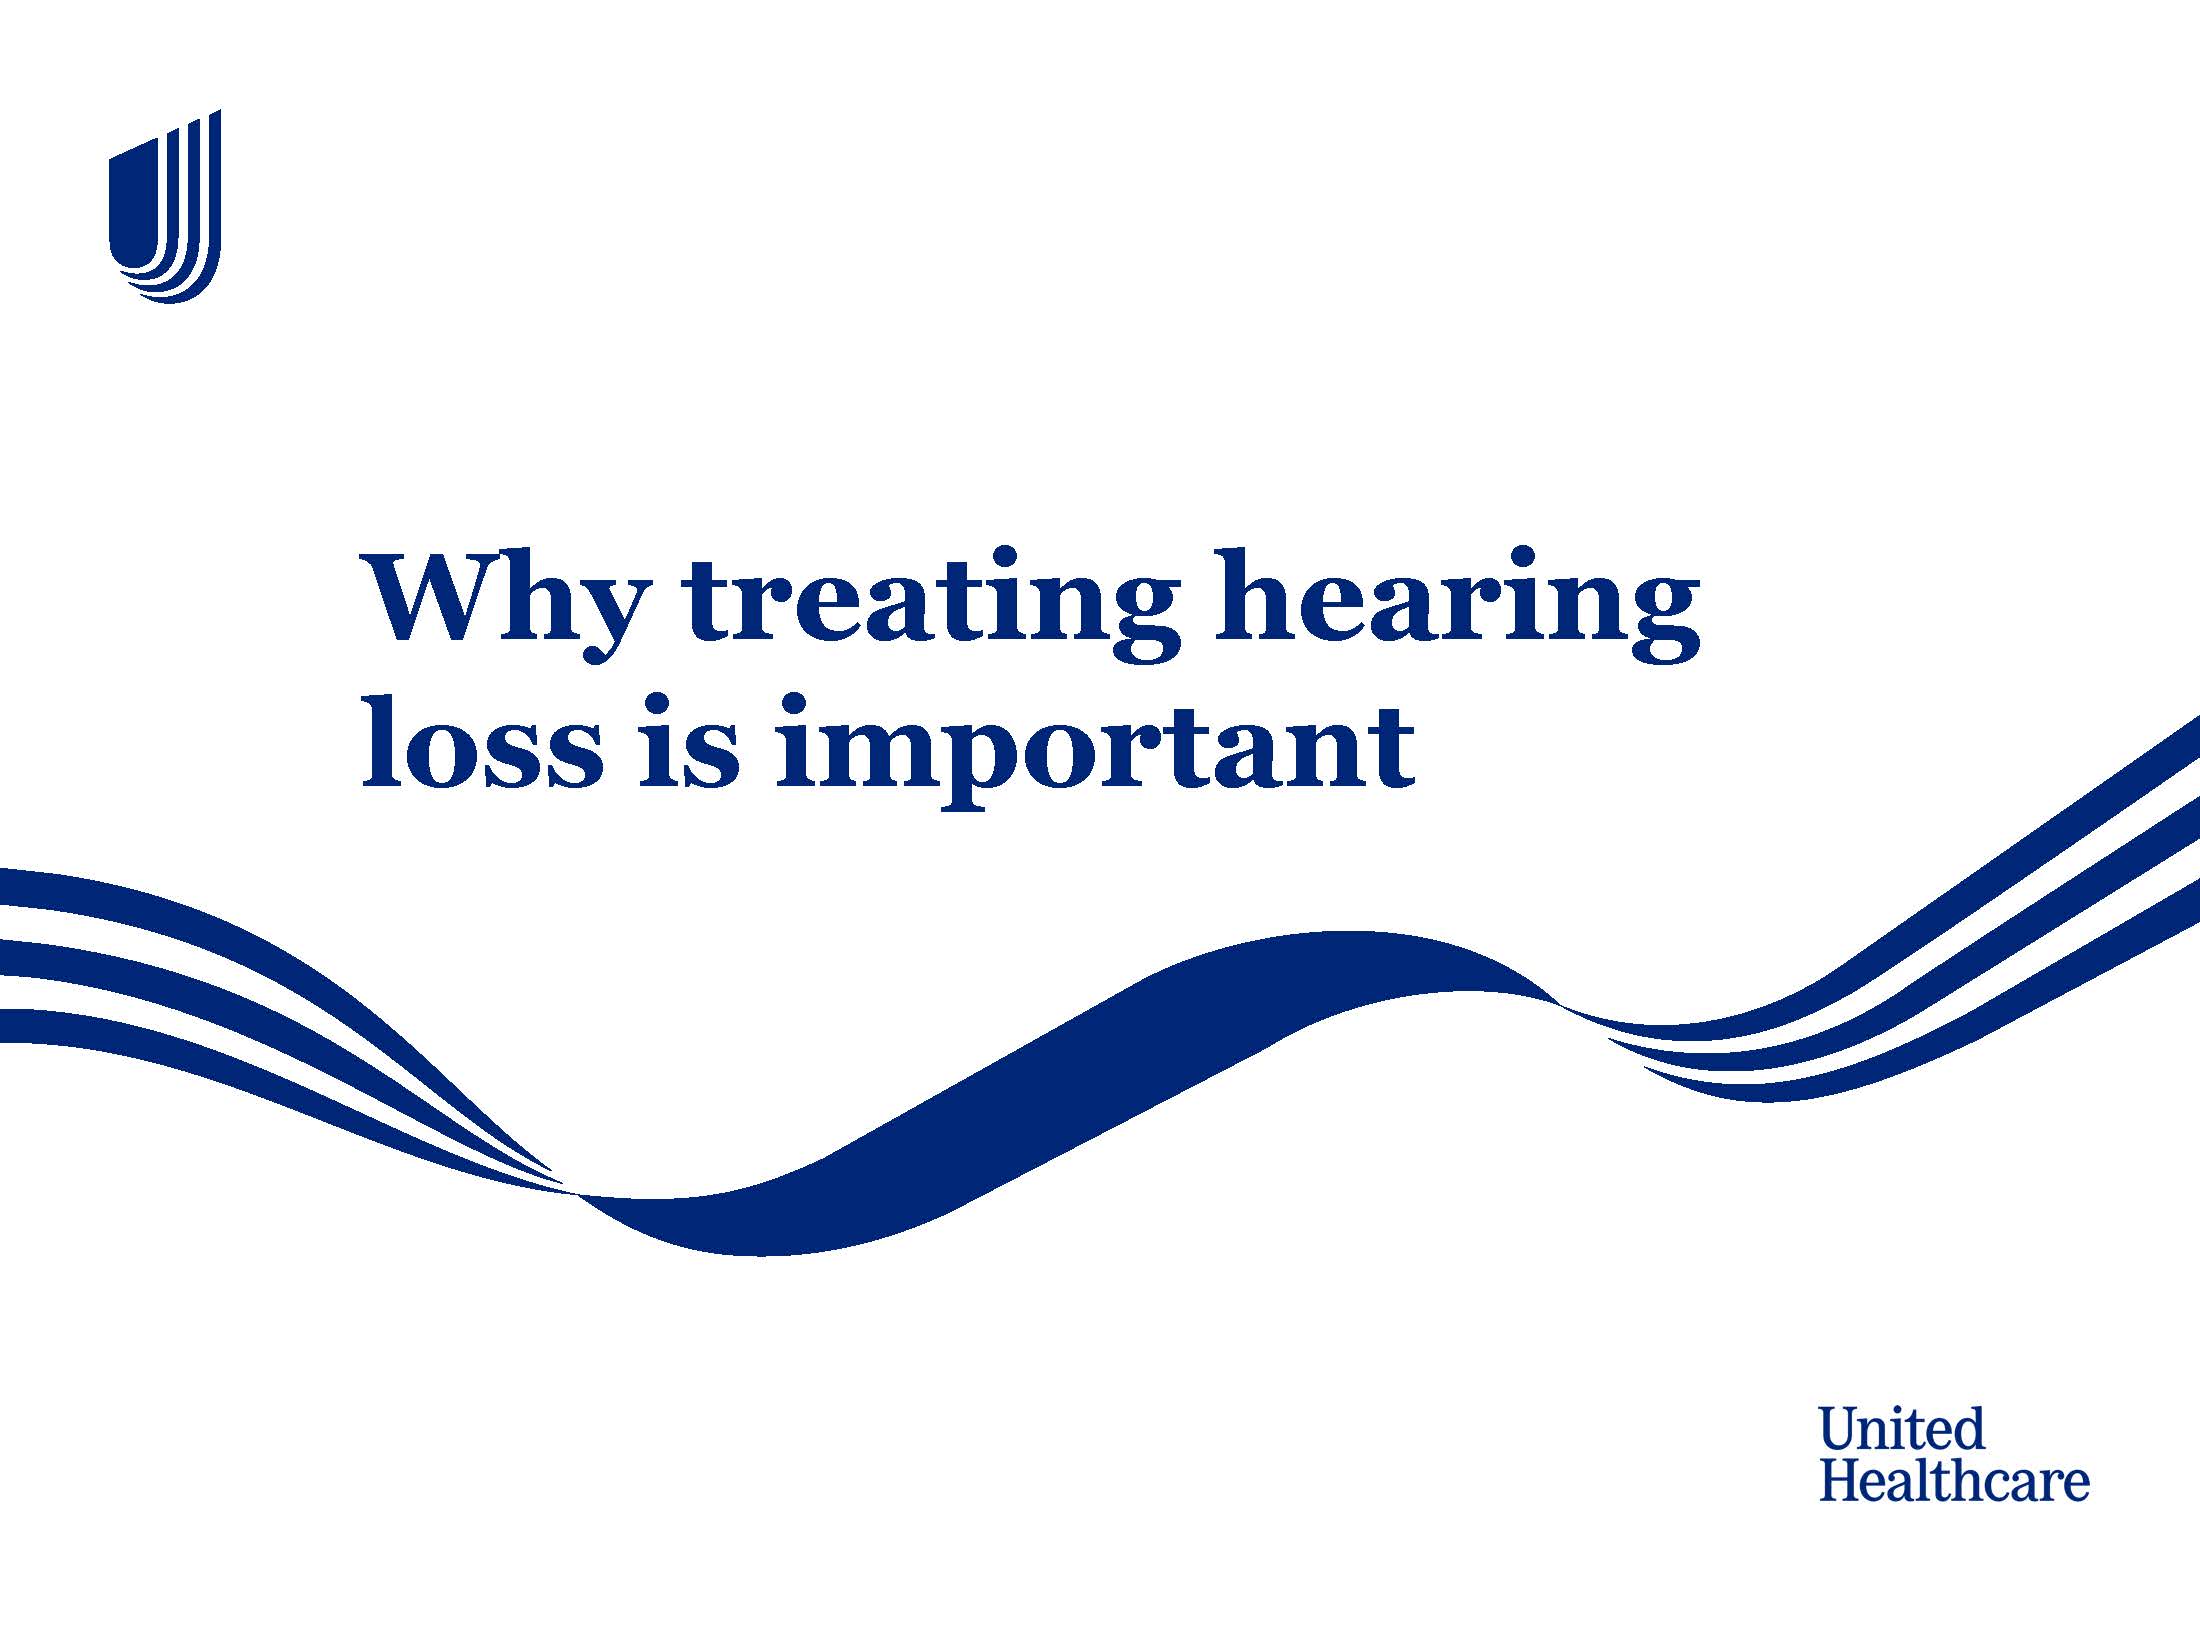 The importance of treating hearing loss